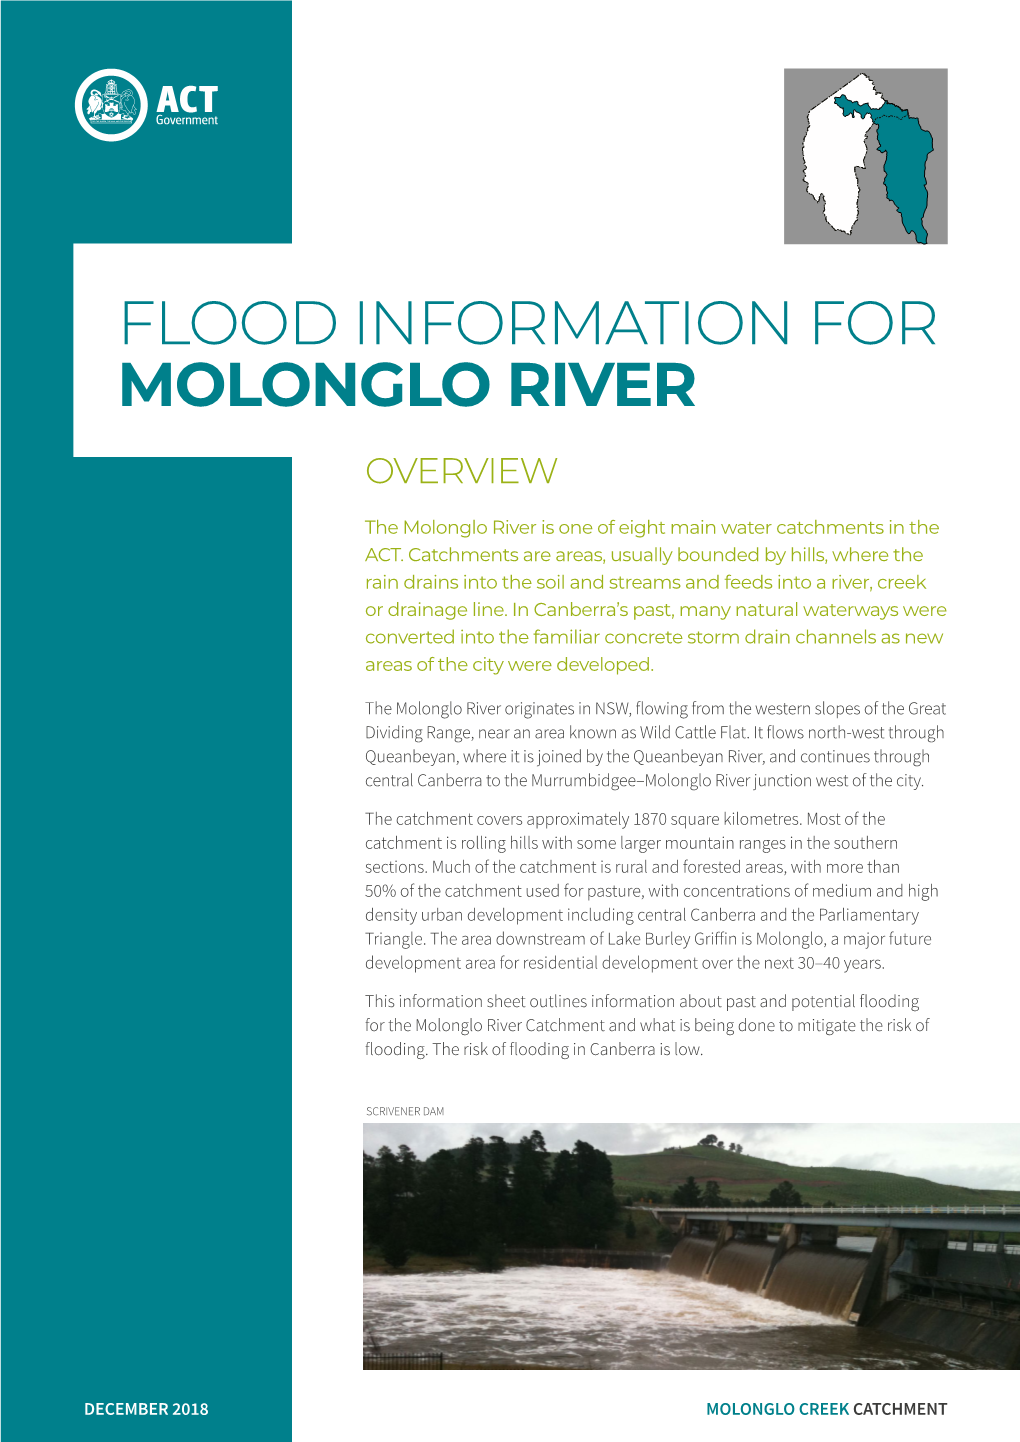 ACT Flood Information for Molonglo River